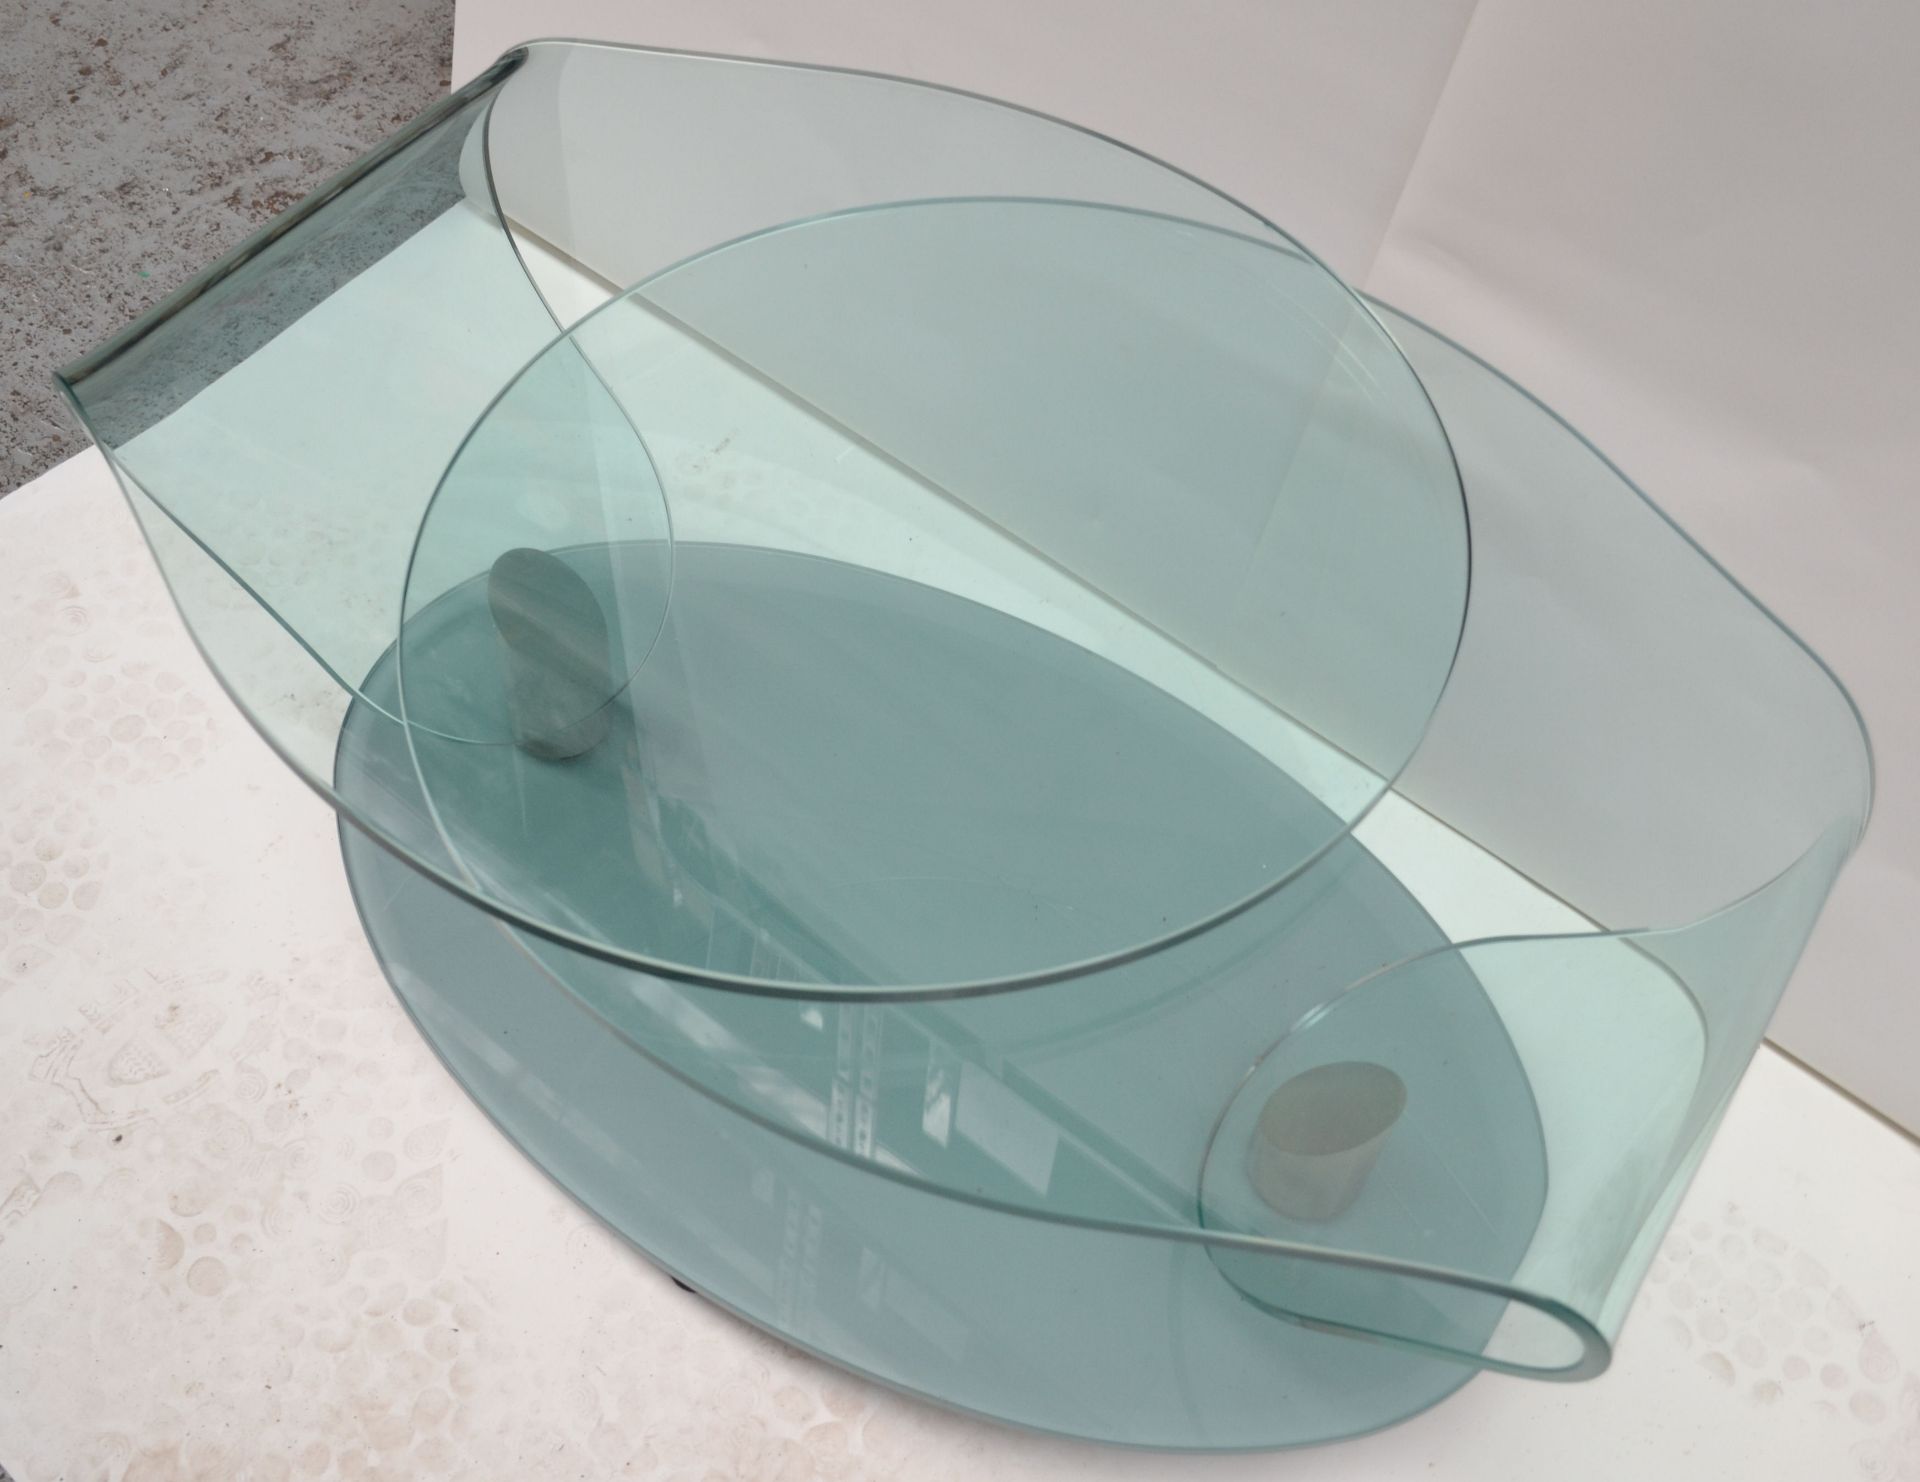 1 x Contemporary Swivelling Glass Coffee Table - AE007 - CL007 - Location: Altrincham WA14 - Image 9 of 13